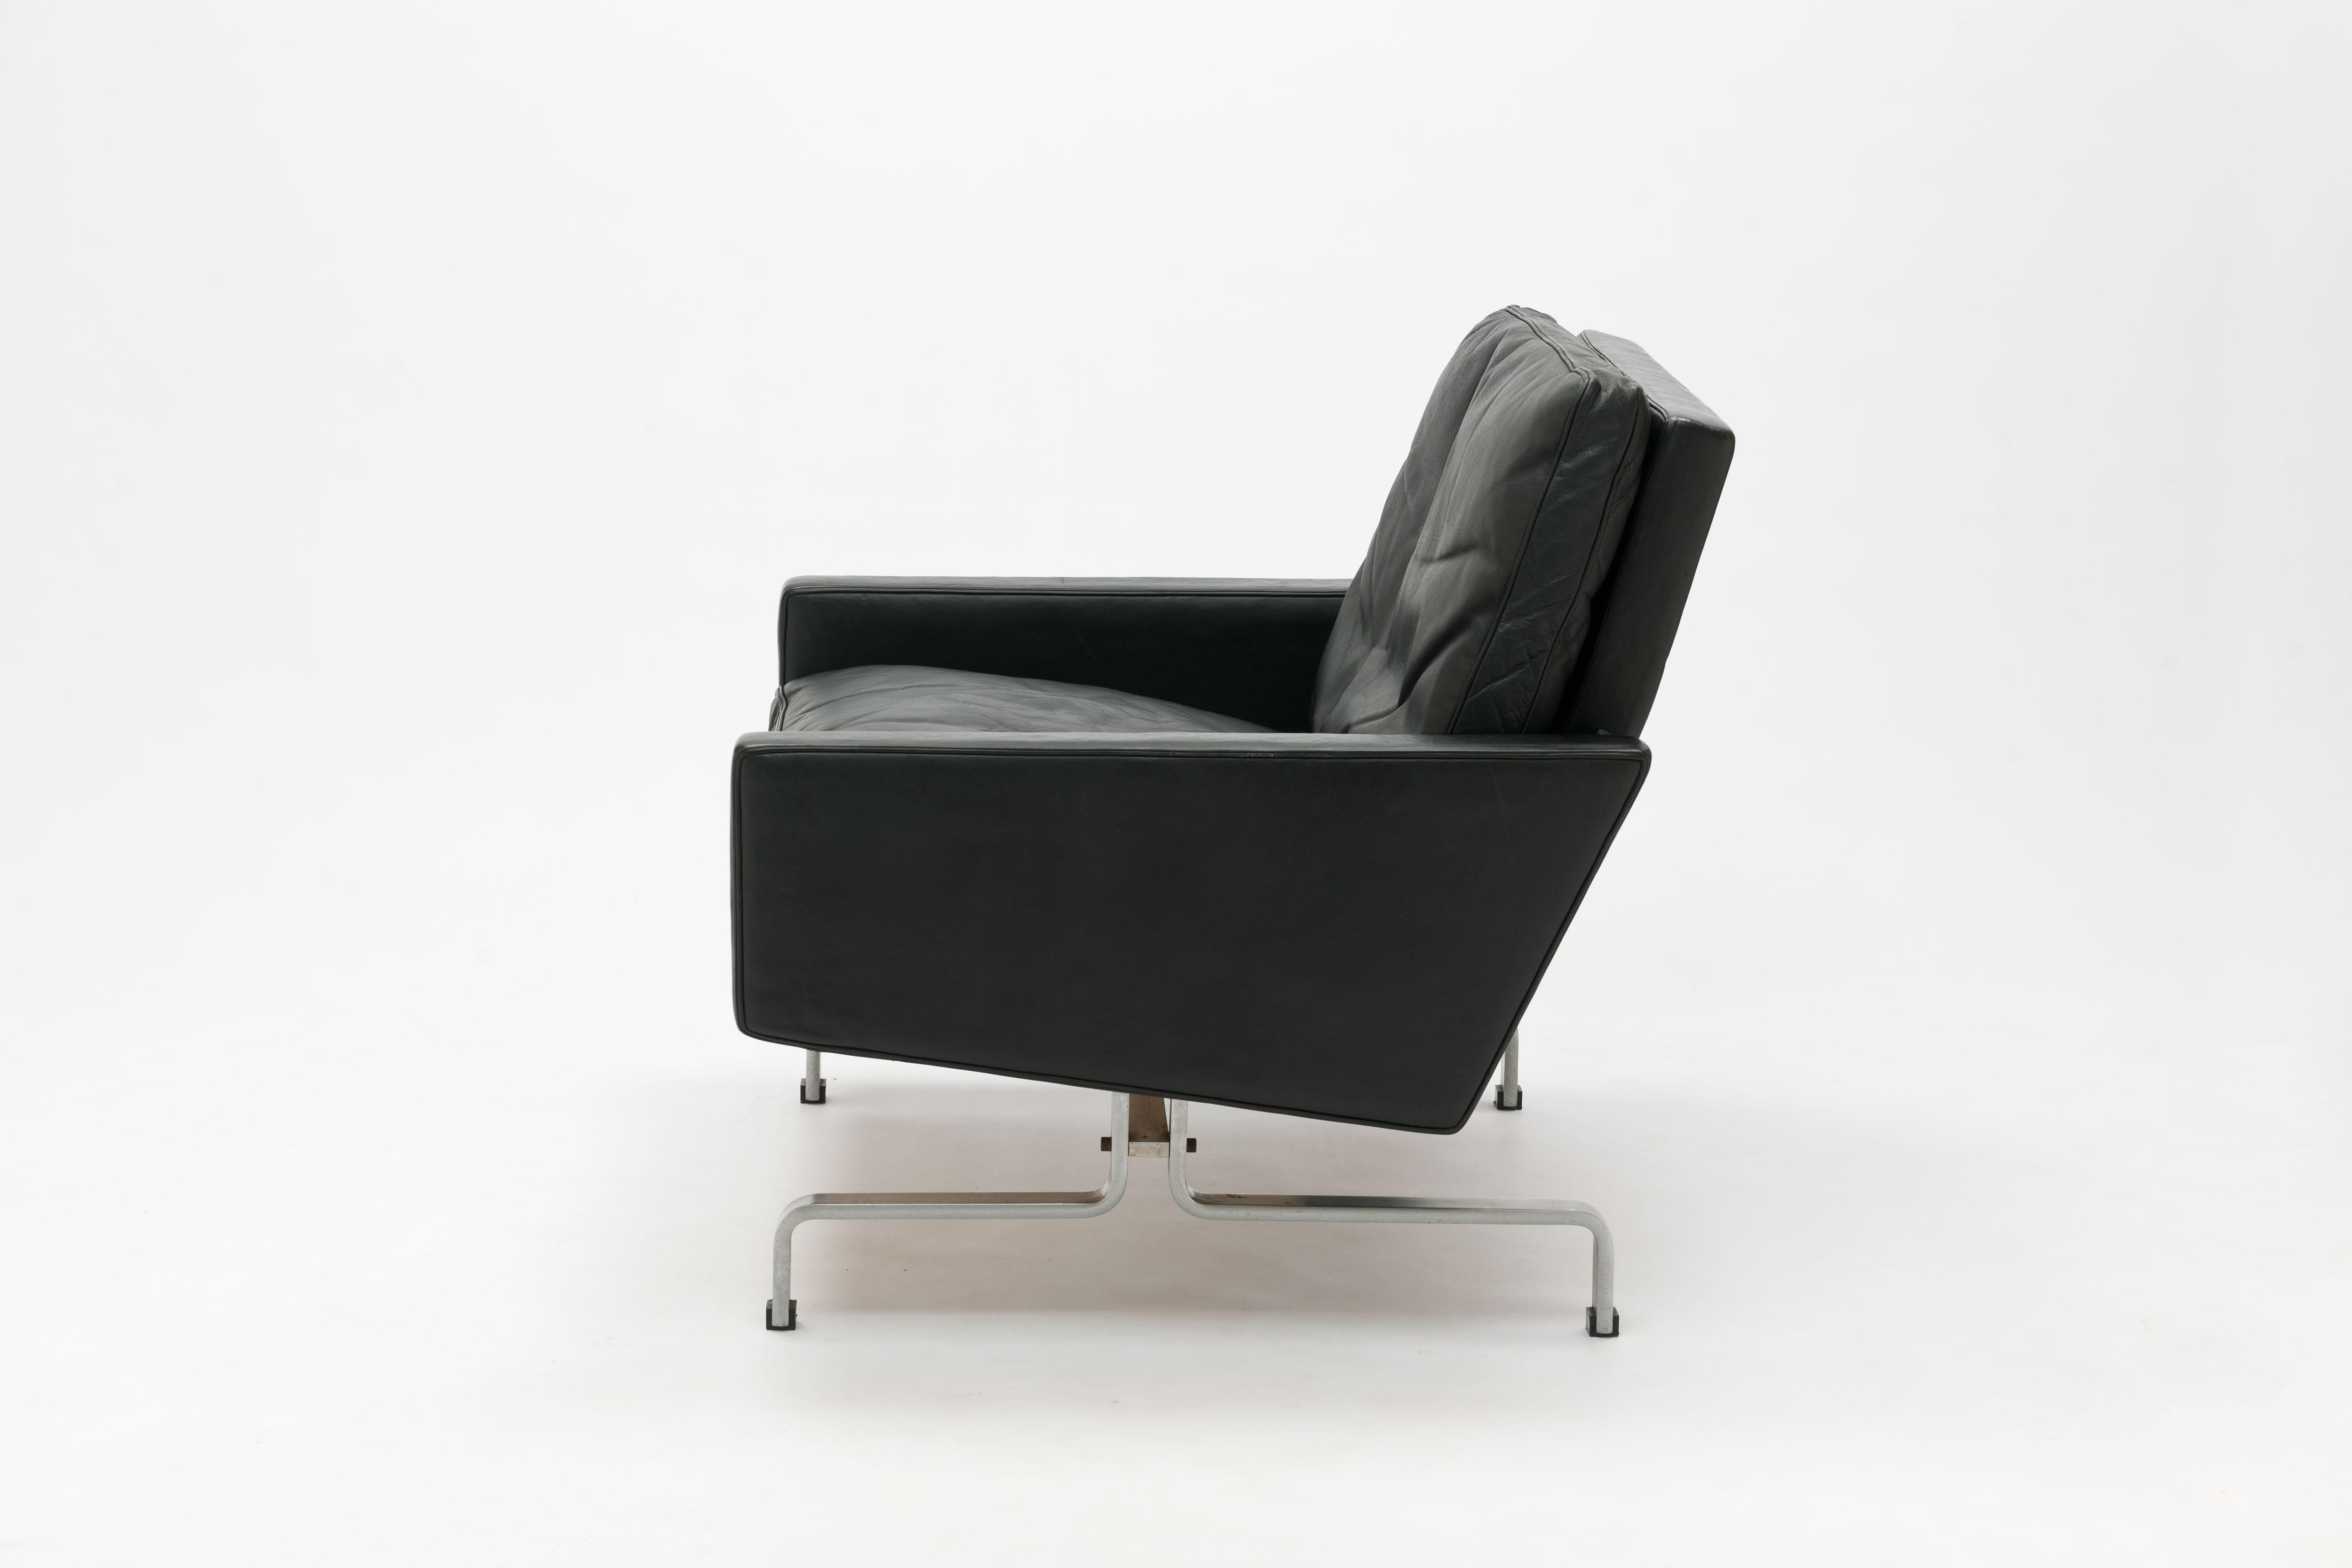 Poul Kjaerholm Pk31 lounge chair from First production series executed by maker Ejvind Kold Christensen (see marking on image #13 + 14) in original black leather.

 